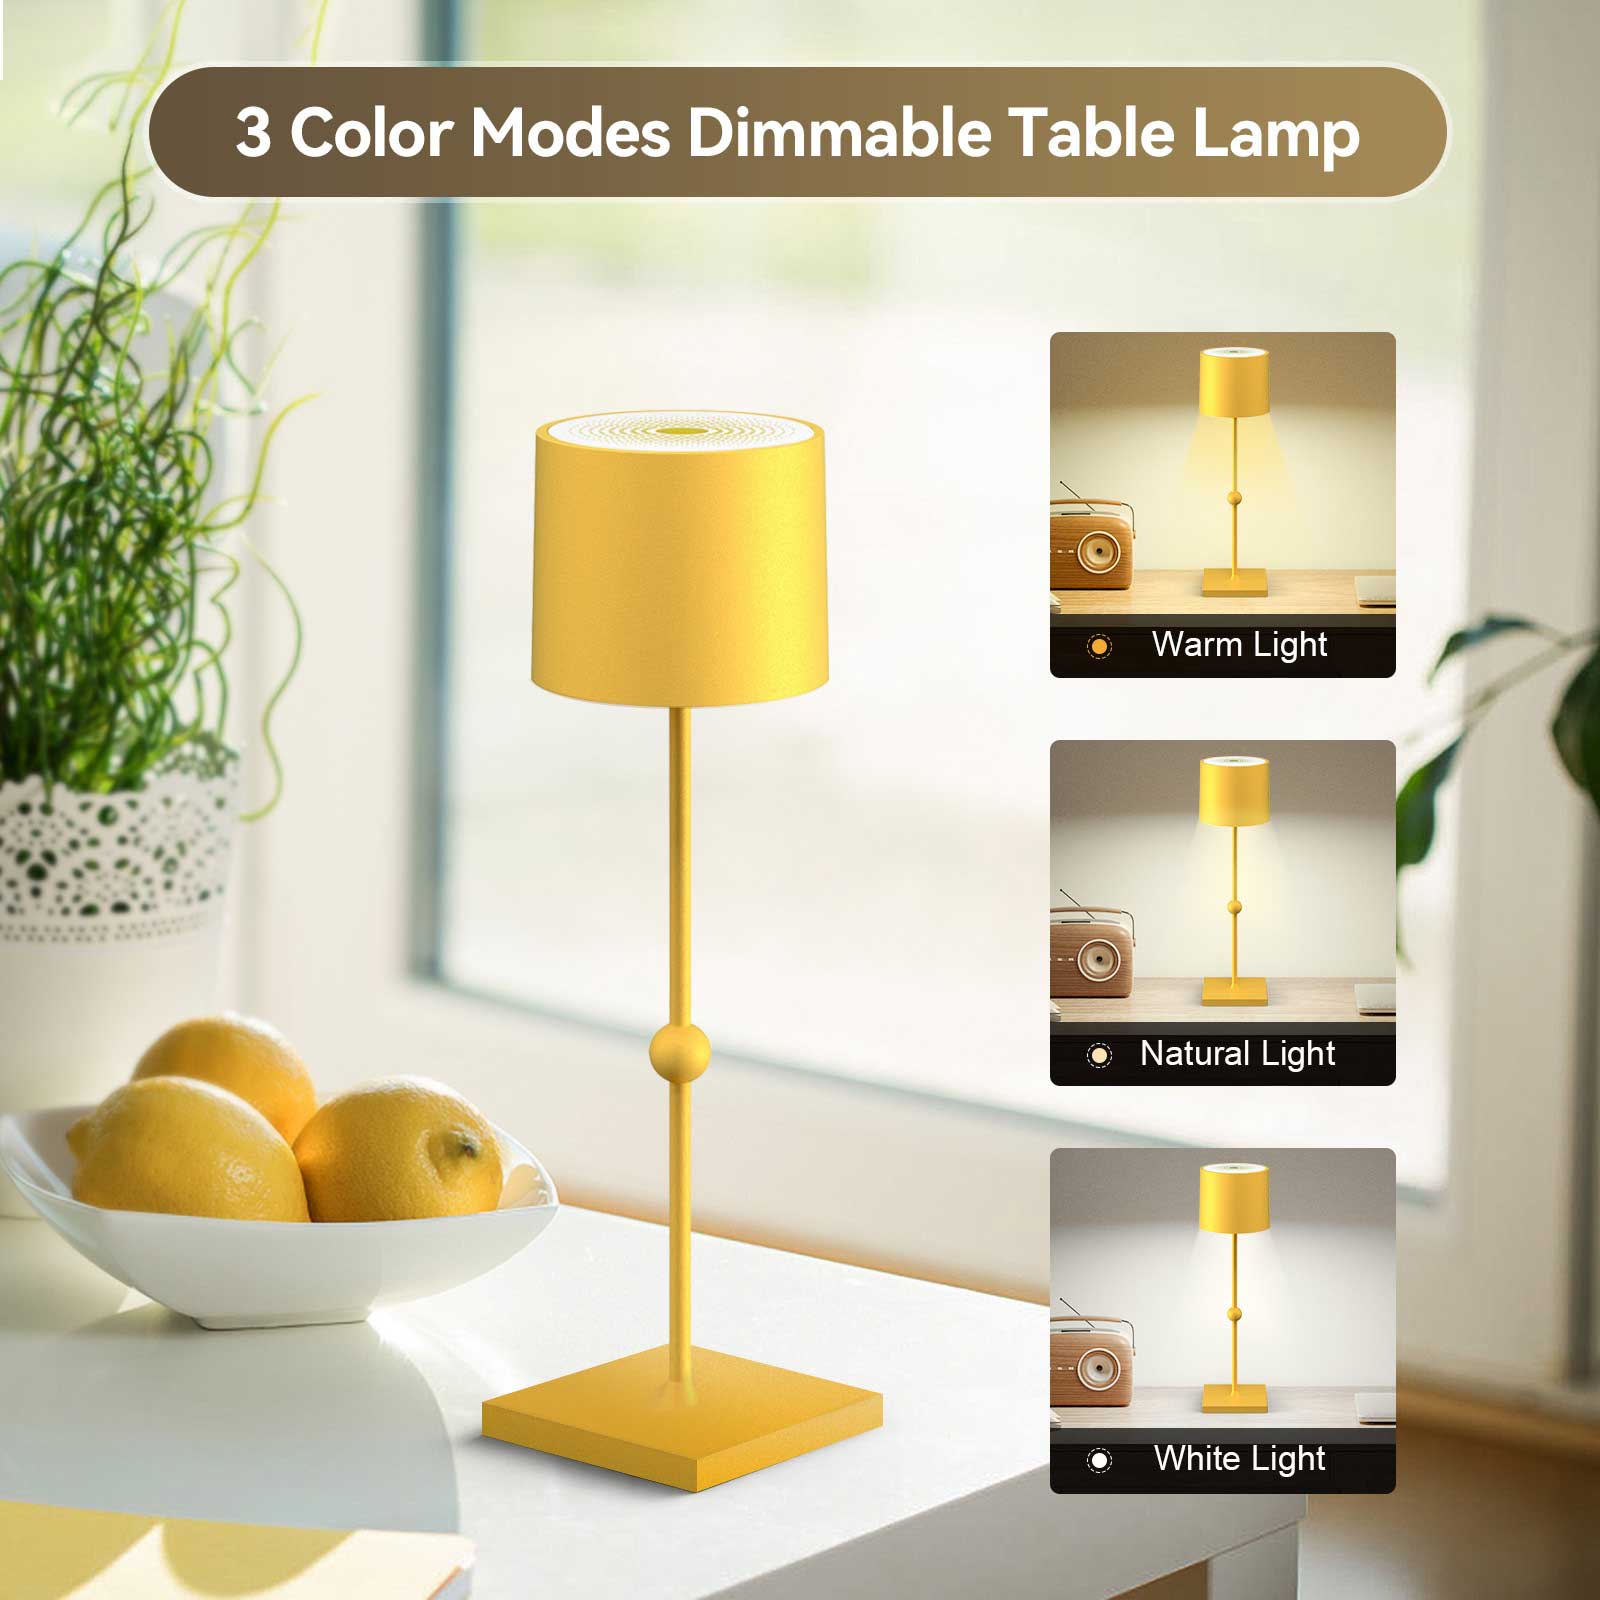 Huiveoo 3 Color Modes Dimmable Table Lamp Silva-C Gold